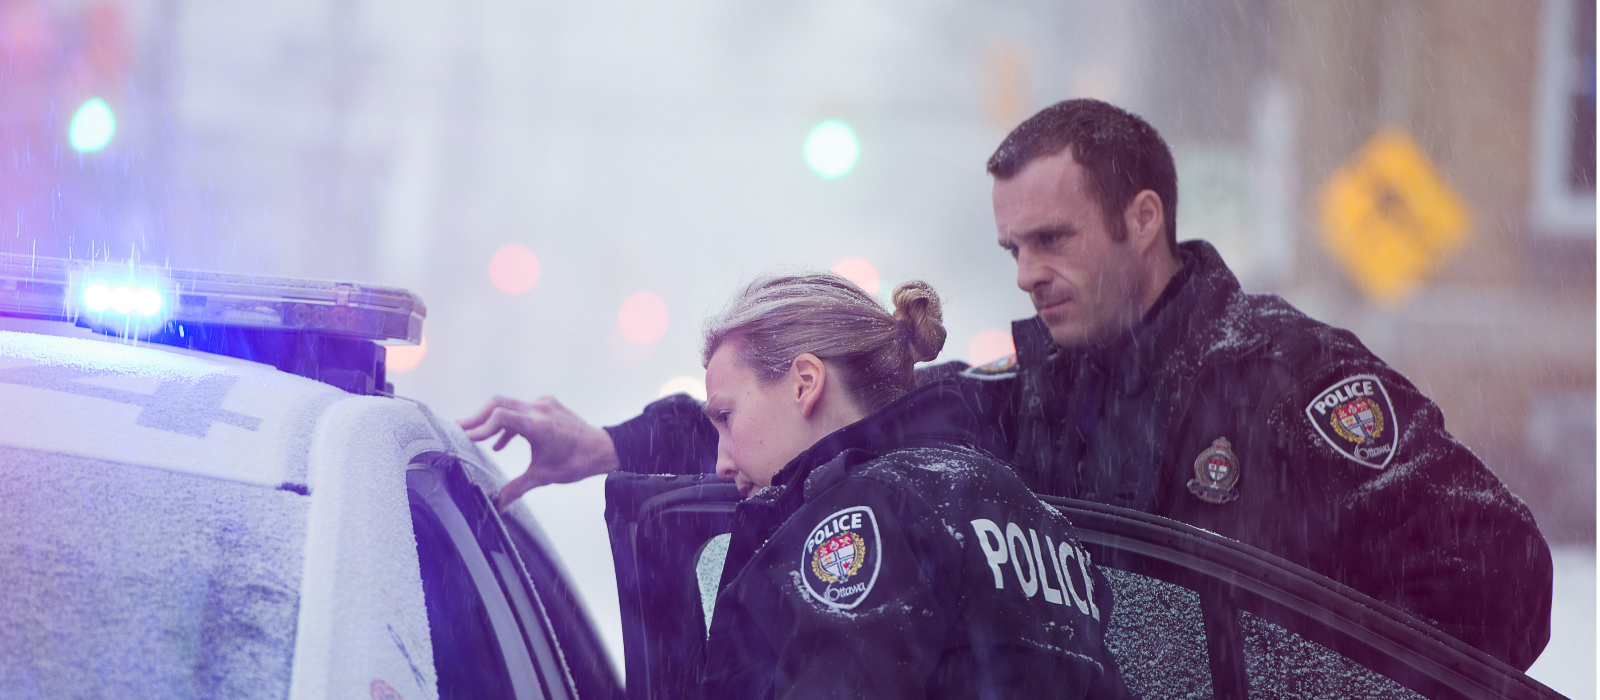 Image of Ottawa Police Service officers responding to a call for service